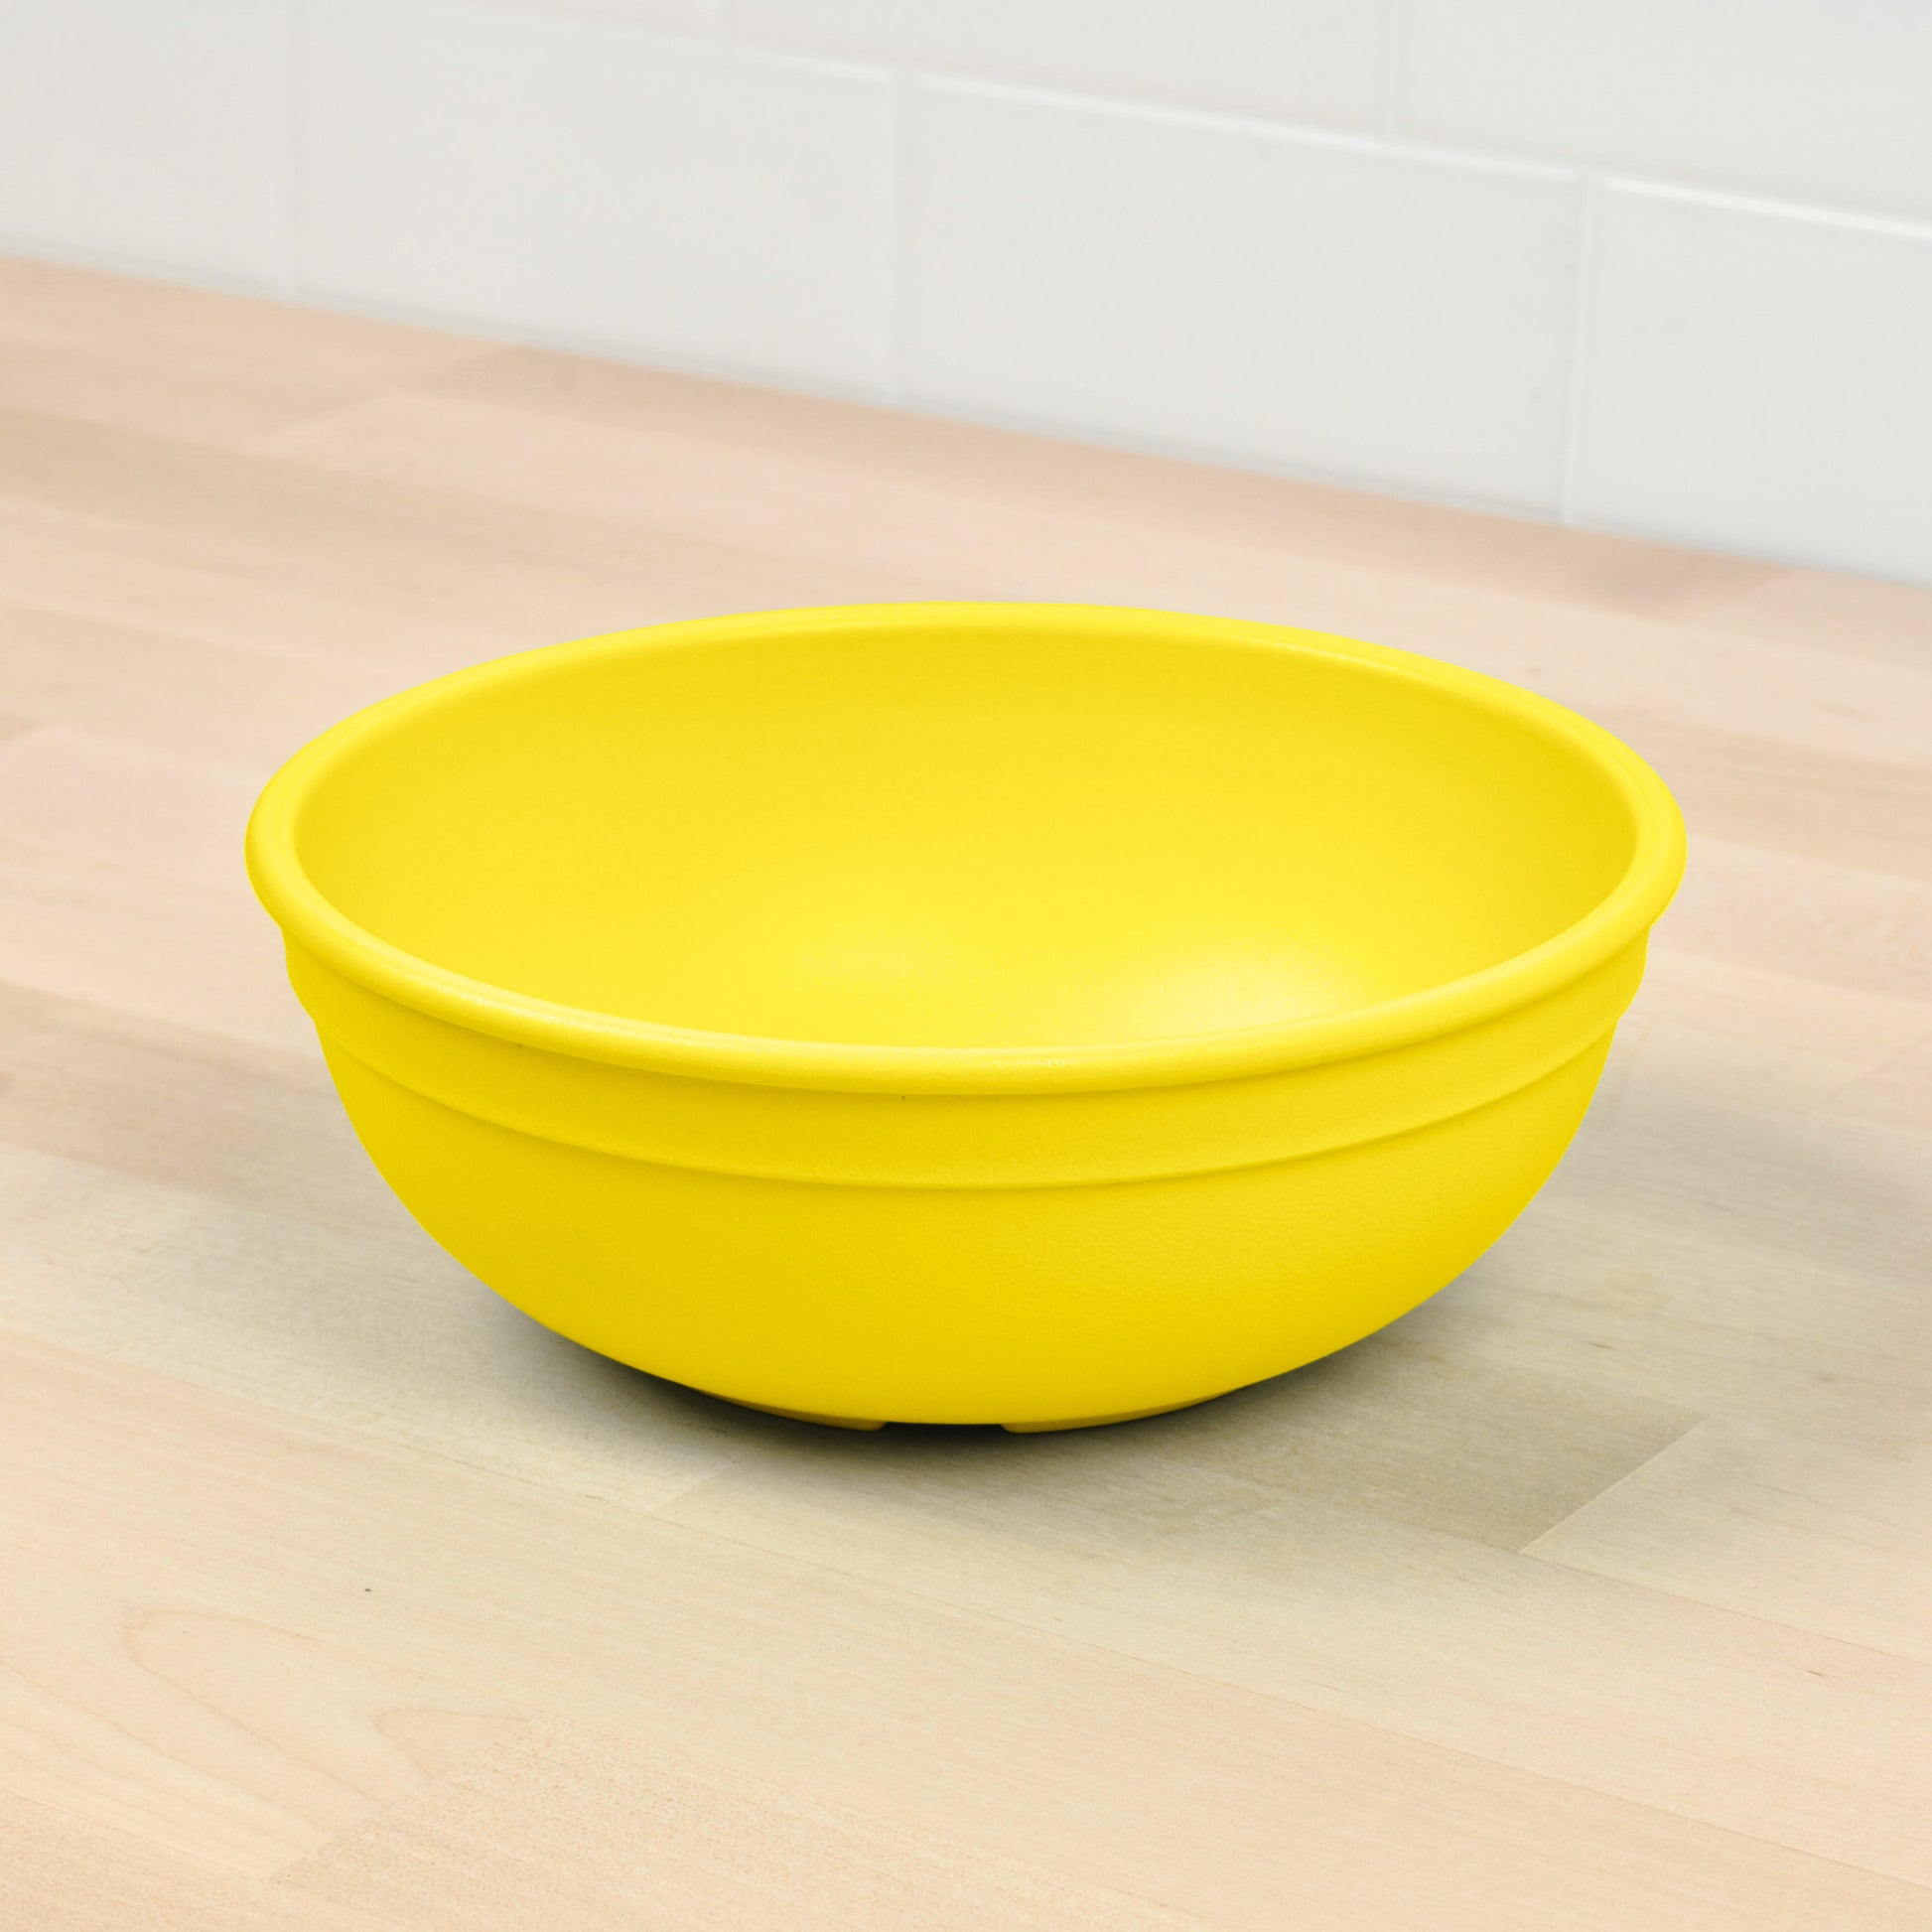 Re-Play Bowl | Yellow Large Size from Bear & Moo